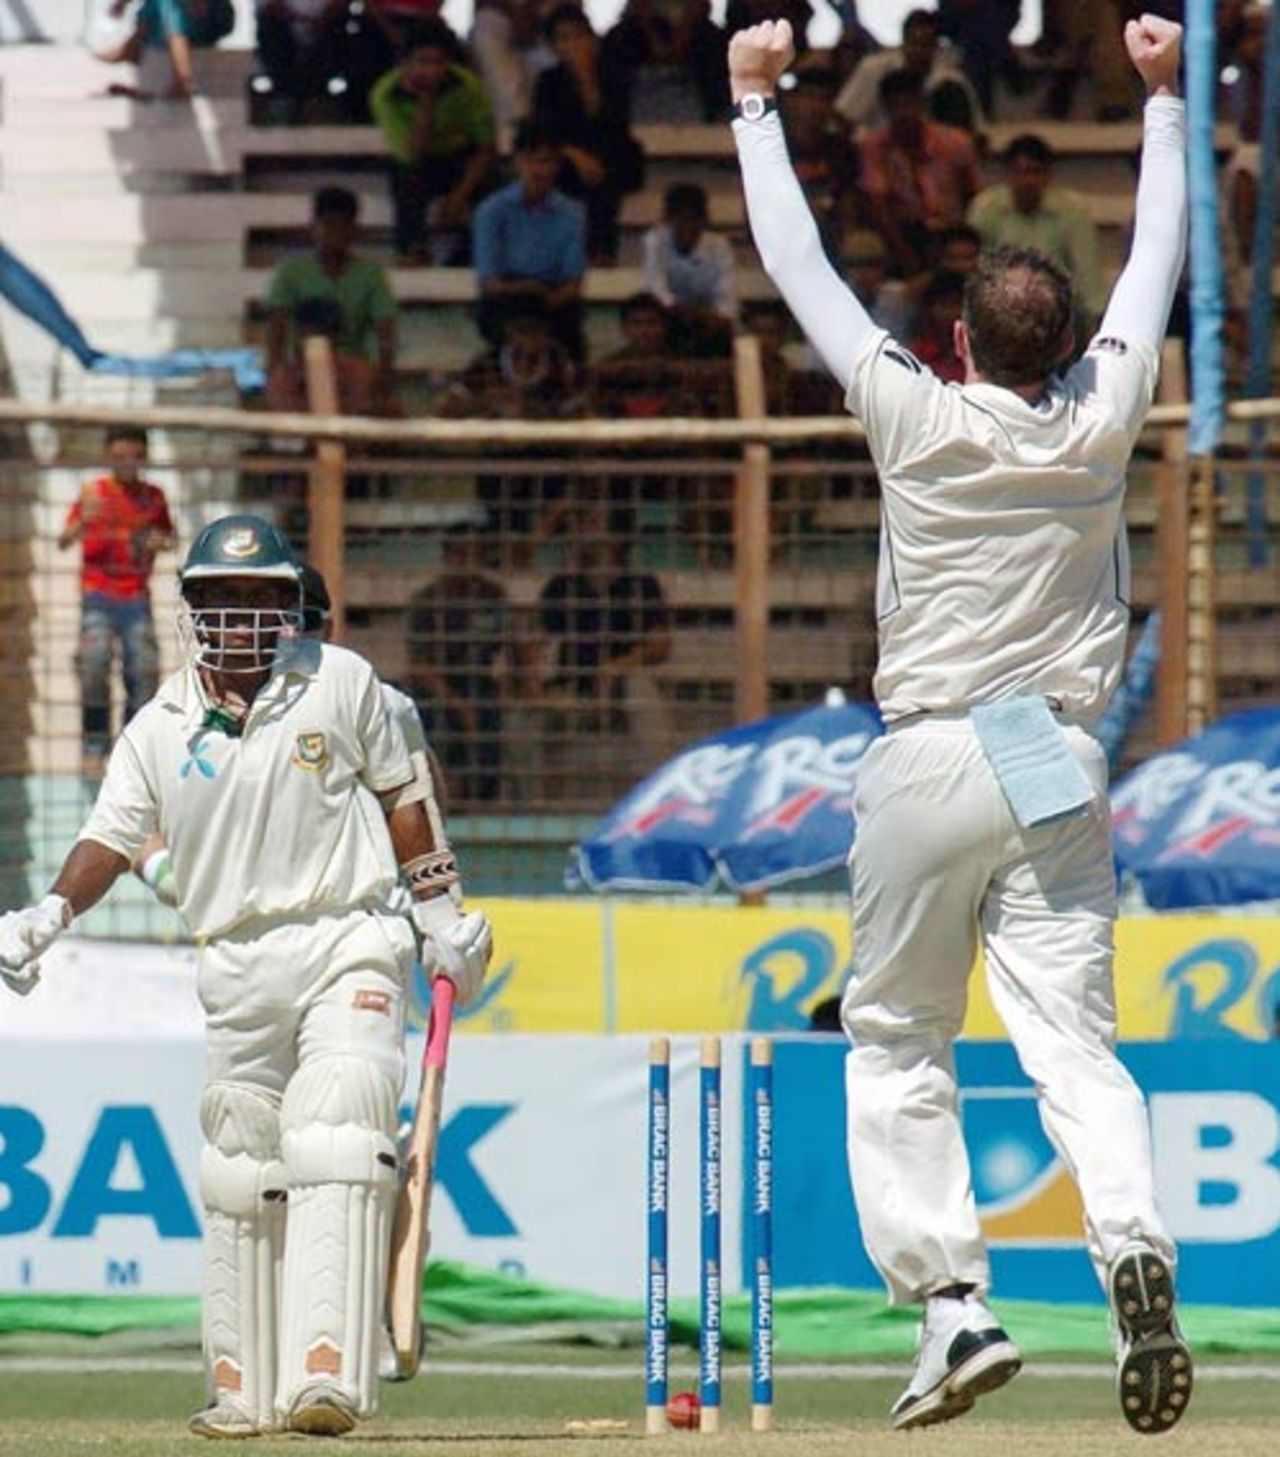 Iain O'Brien is a happy man after getting Rajin Saleh bowled, Bangladesh v New Zealand, 1st Test, Chittagong, 1st day, October 17, 2008